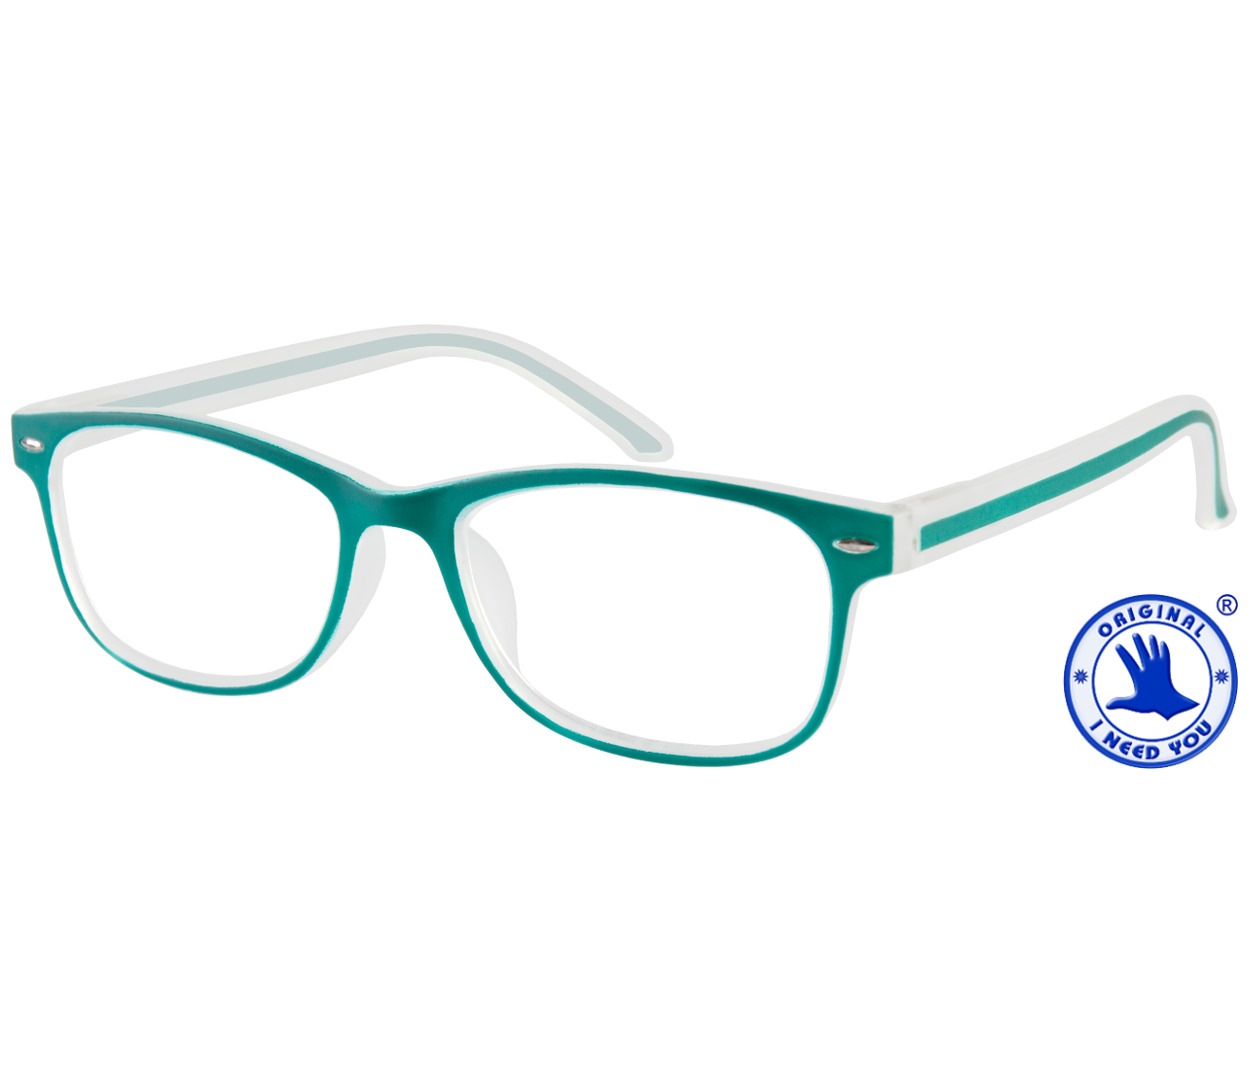 Minty Green Reading Glasses Tiger Specs